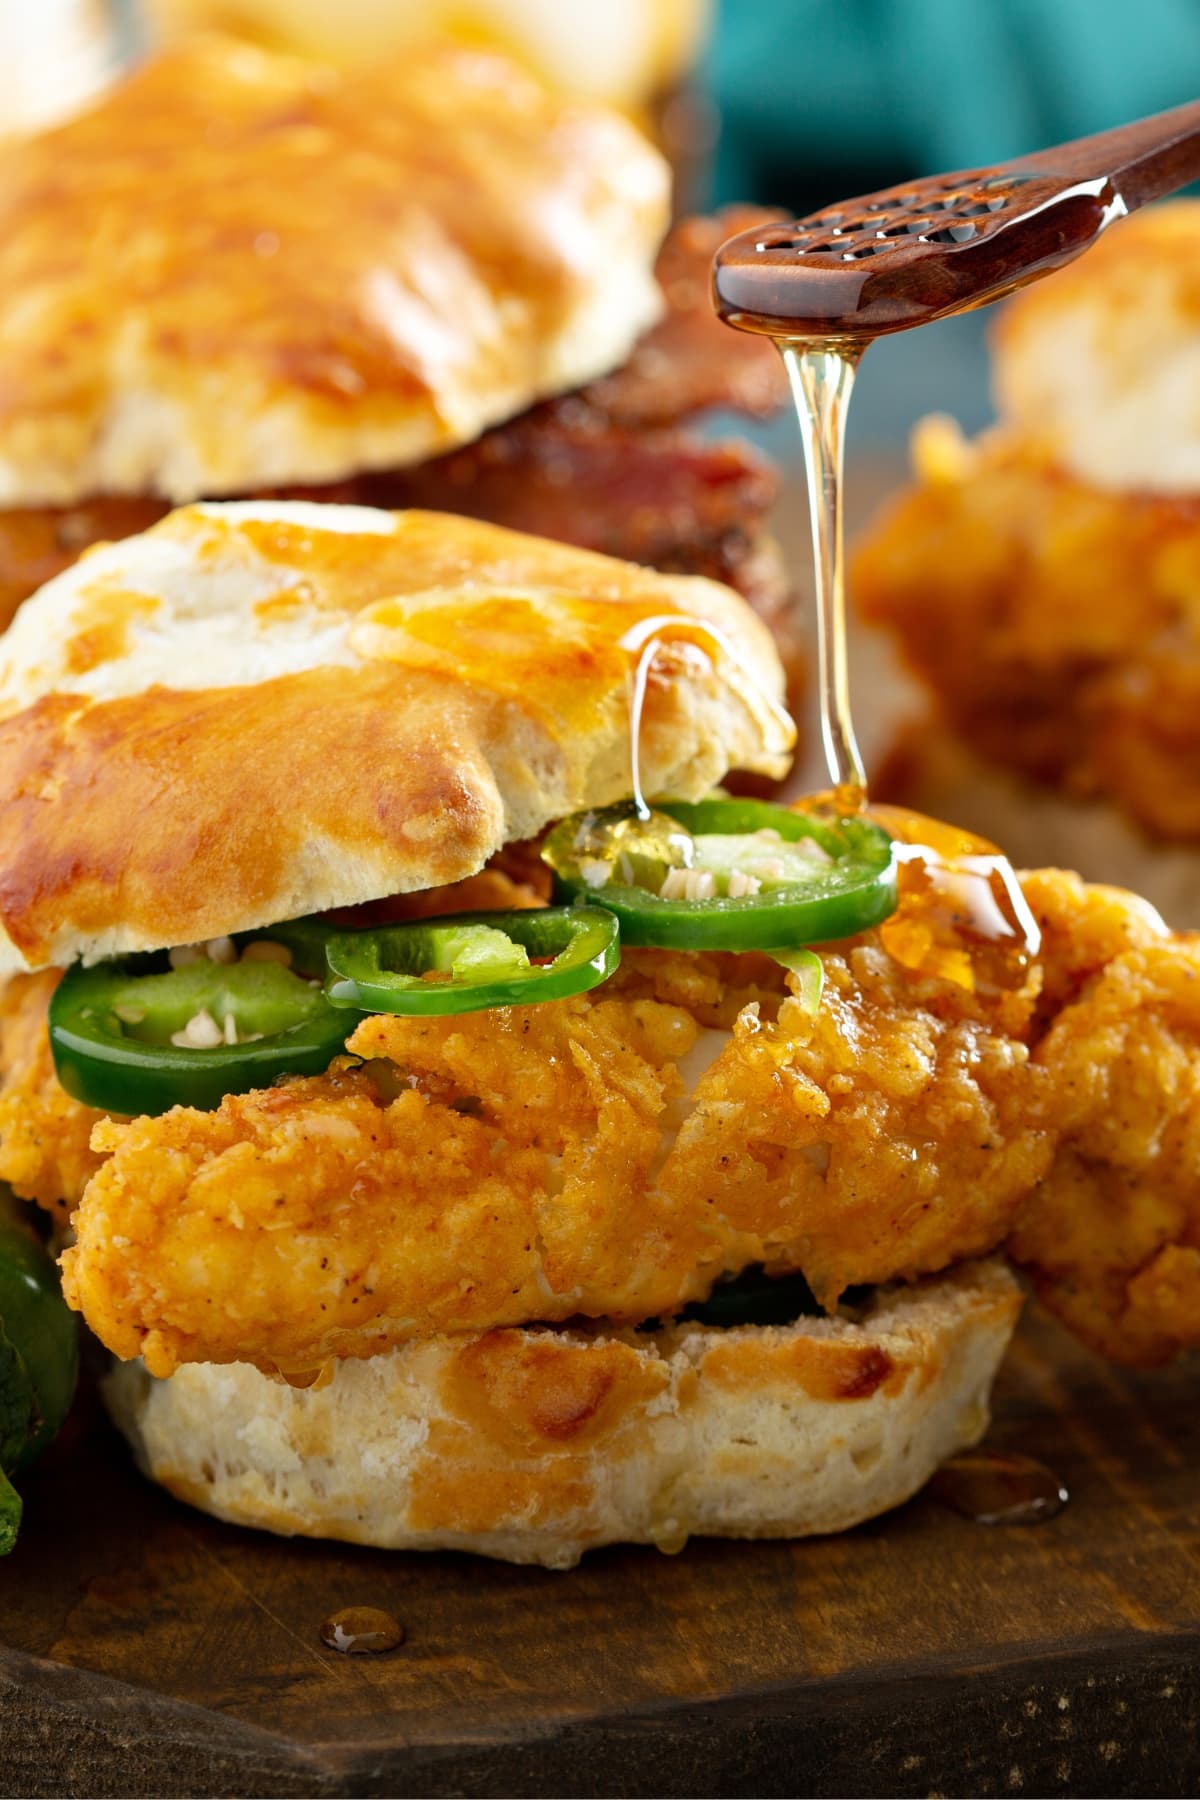 Homemade Breakfast Sandwiches with Fried Chicken and Jalapeno